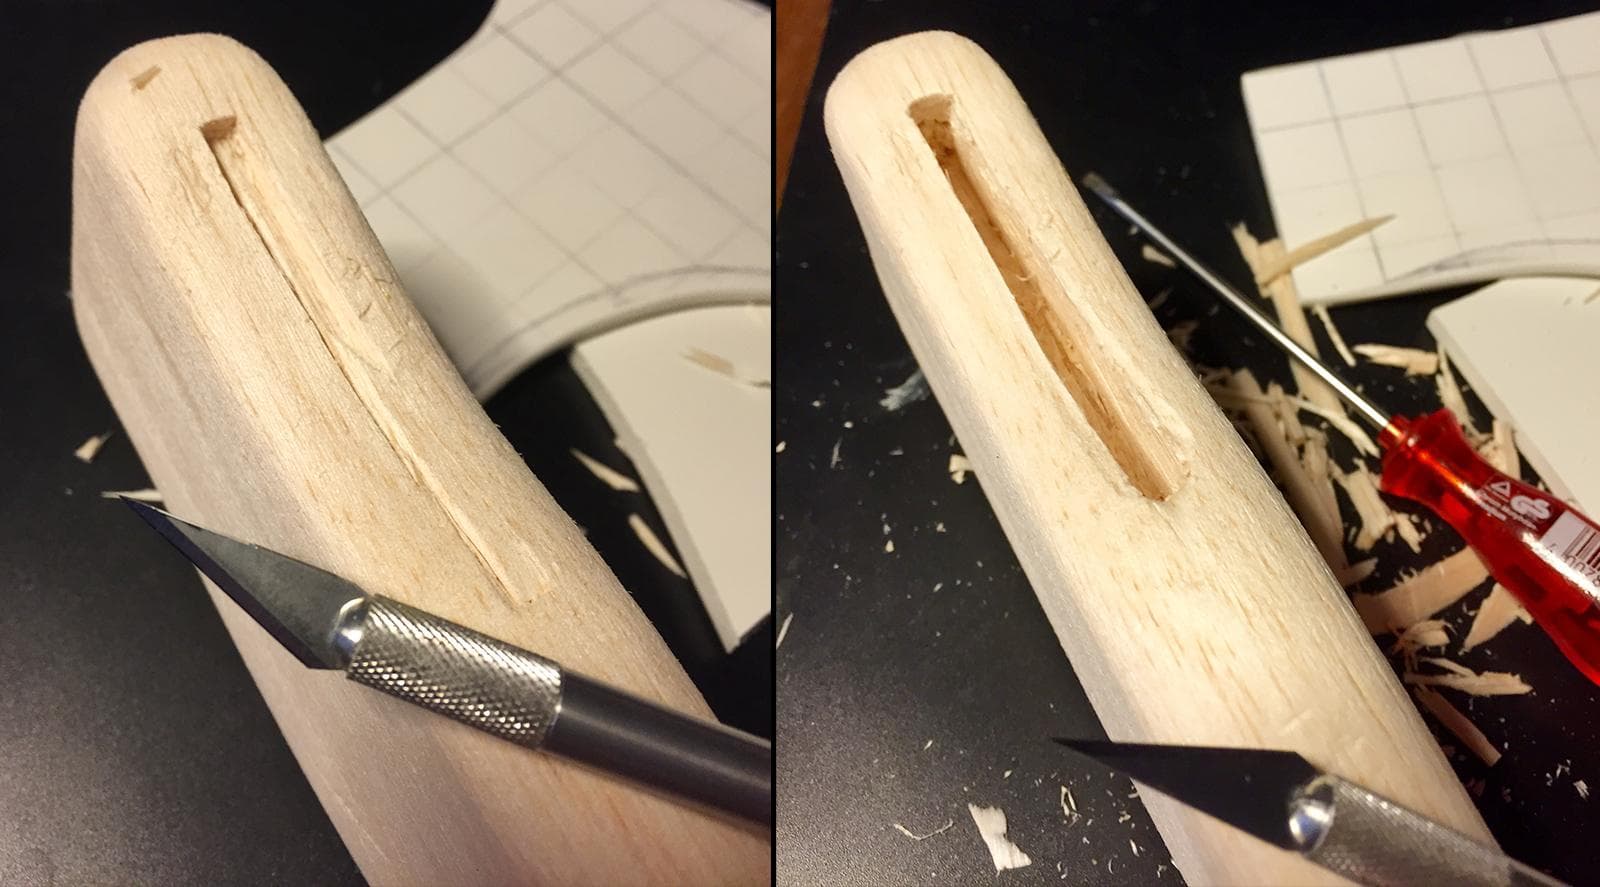 Carving a slot for the axe head